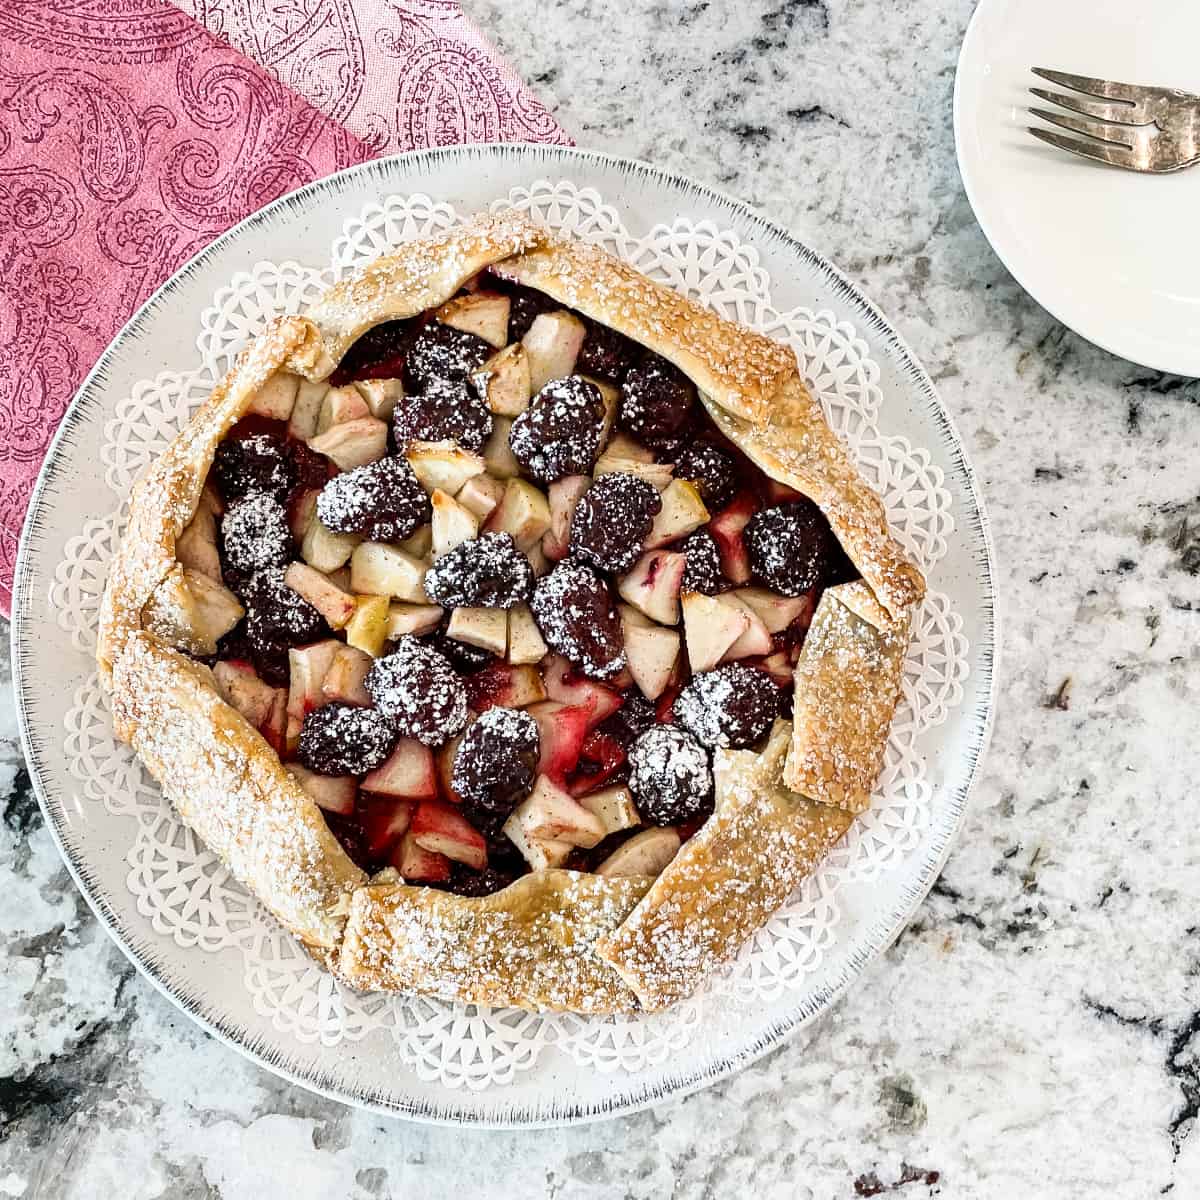 Square image of a rustic tart filled with apple and berries.